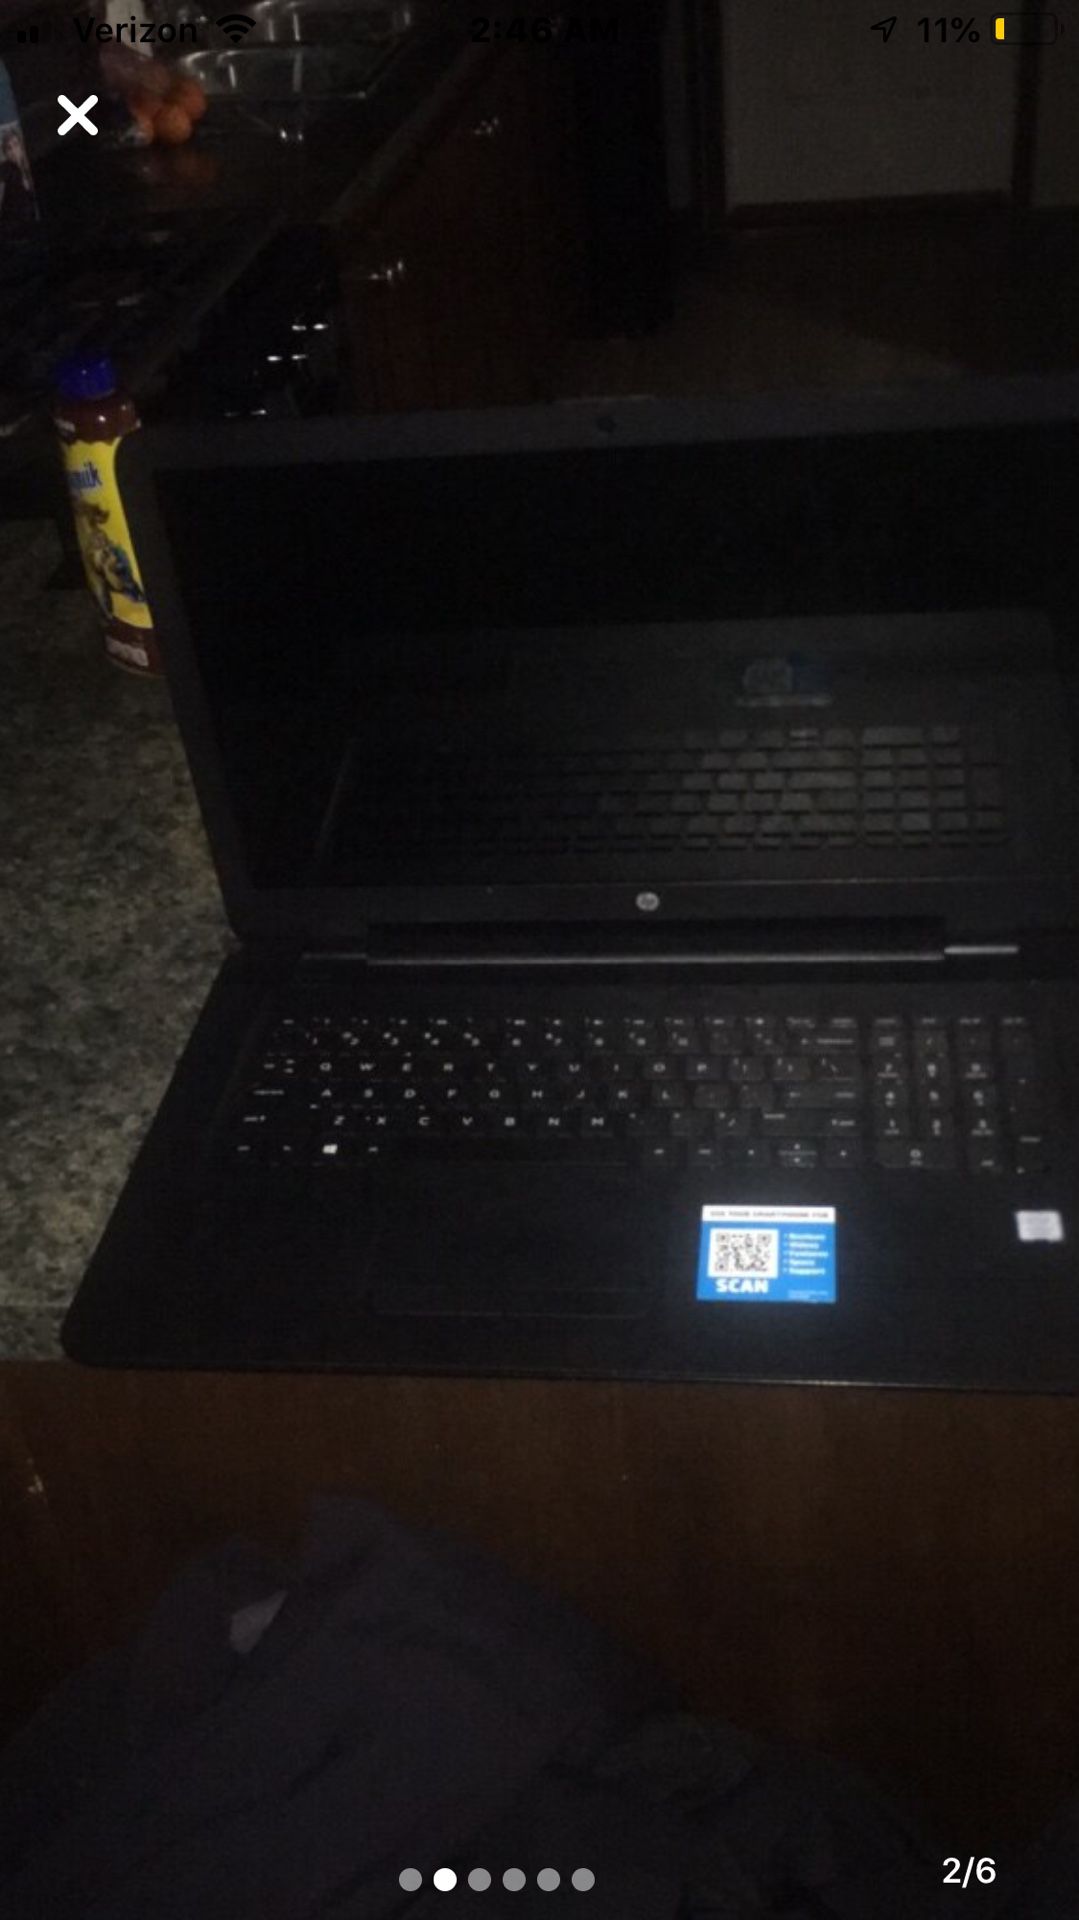 Laptop like new condition $250 with charger. Only used a few times and was updated and screen was replaced a few days ago.